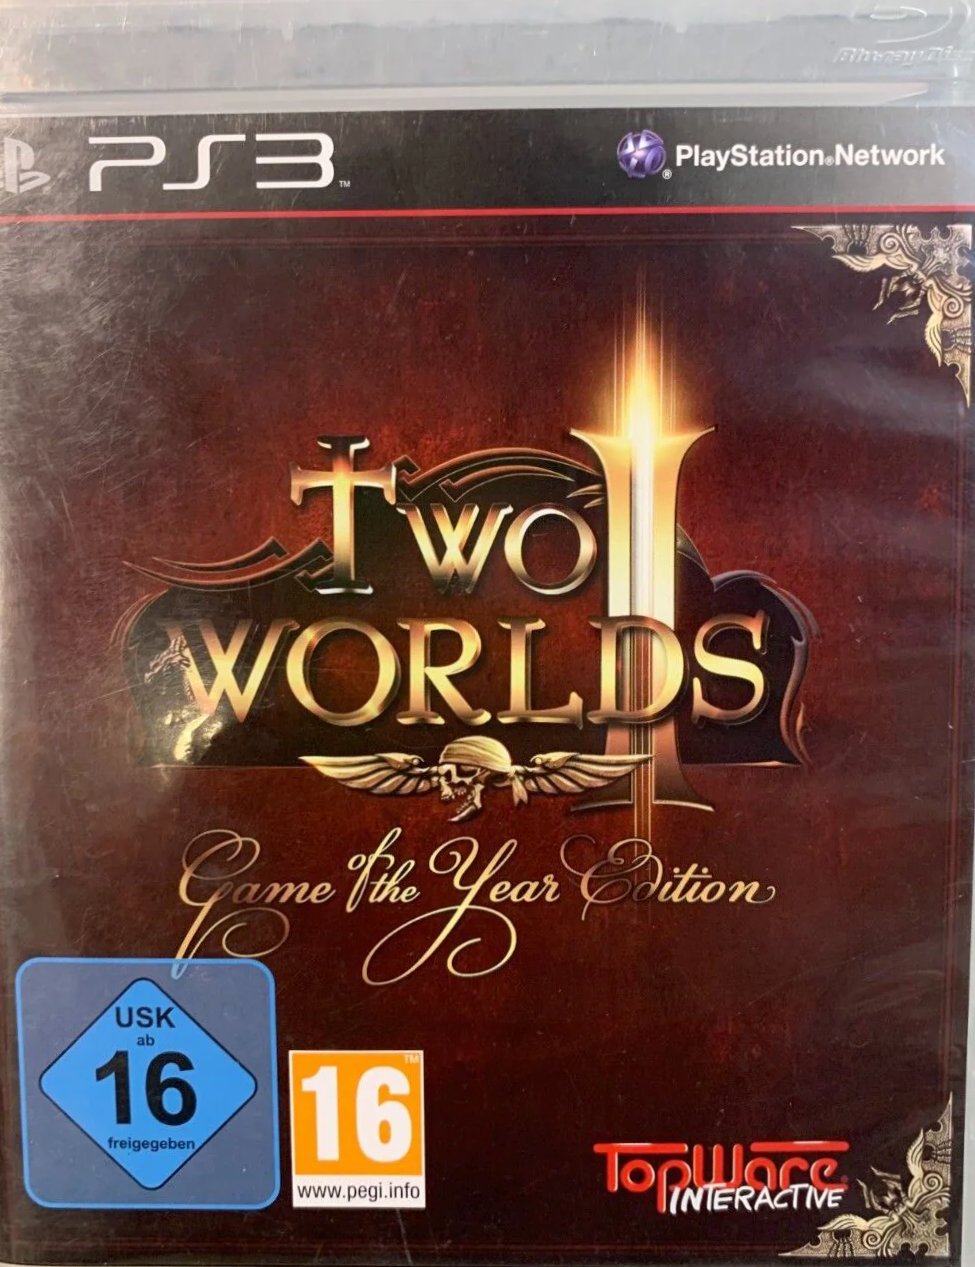 Game | Sony Playstation PS3 | Two Worlds II (Game of the year edition)